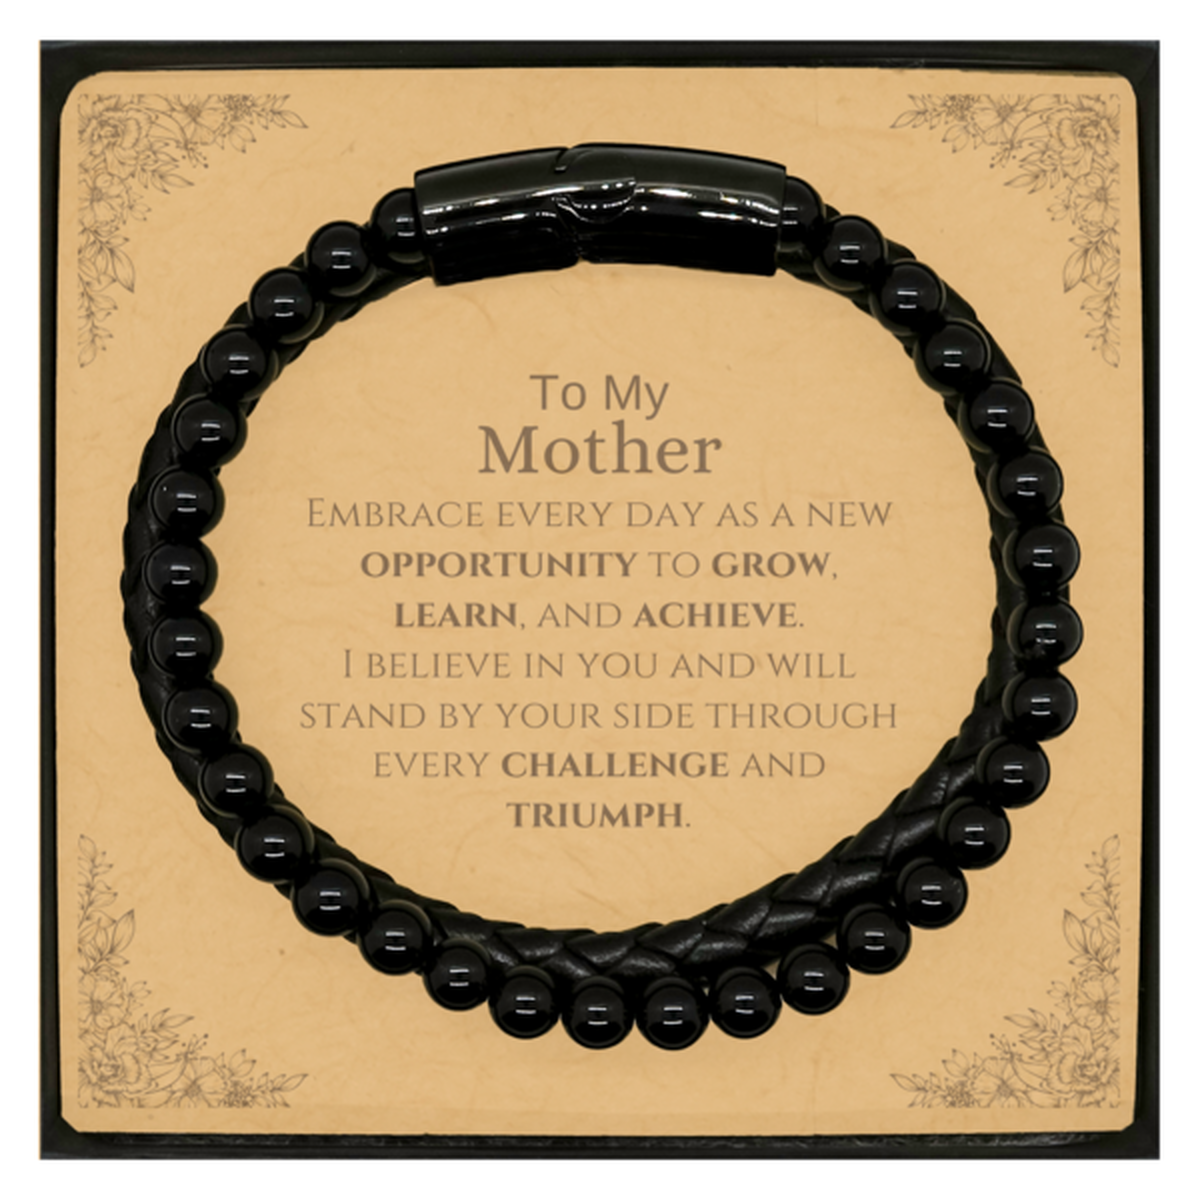 To My Mother Gifts, I believe in you and will stand by your side, Inspirational Stone Leather Bracelets For Mother, Birthday Christmas Motivational Mother Gifts